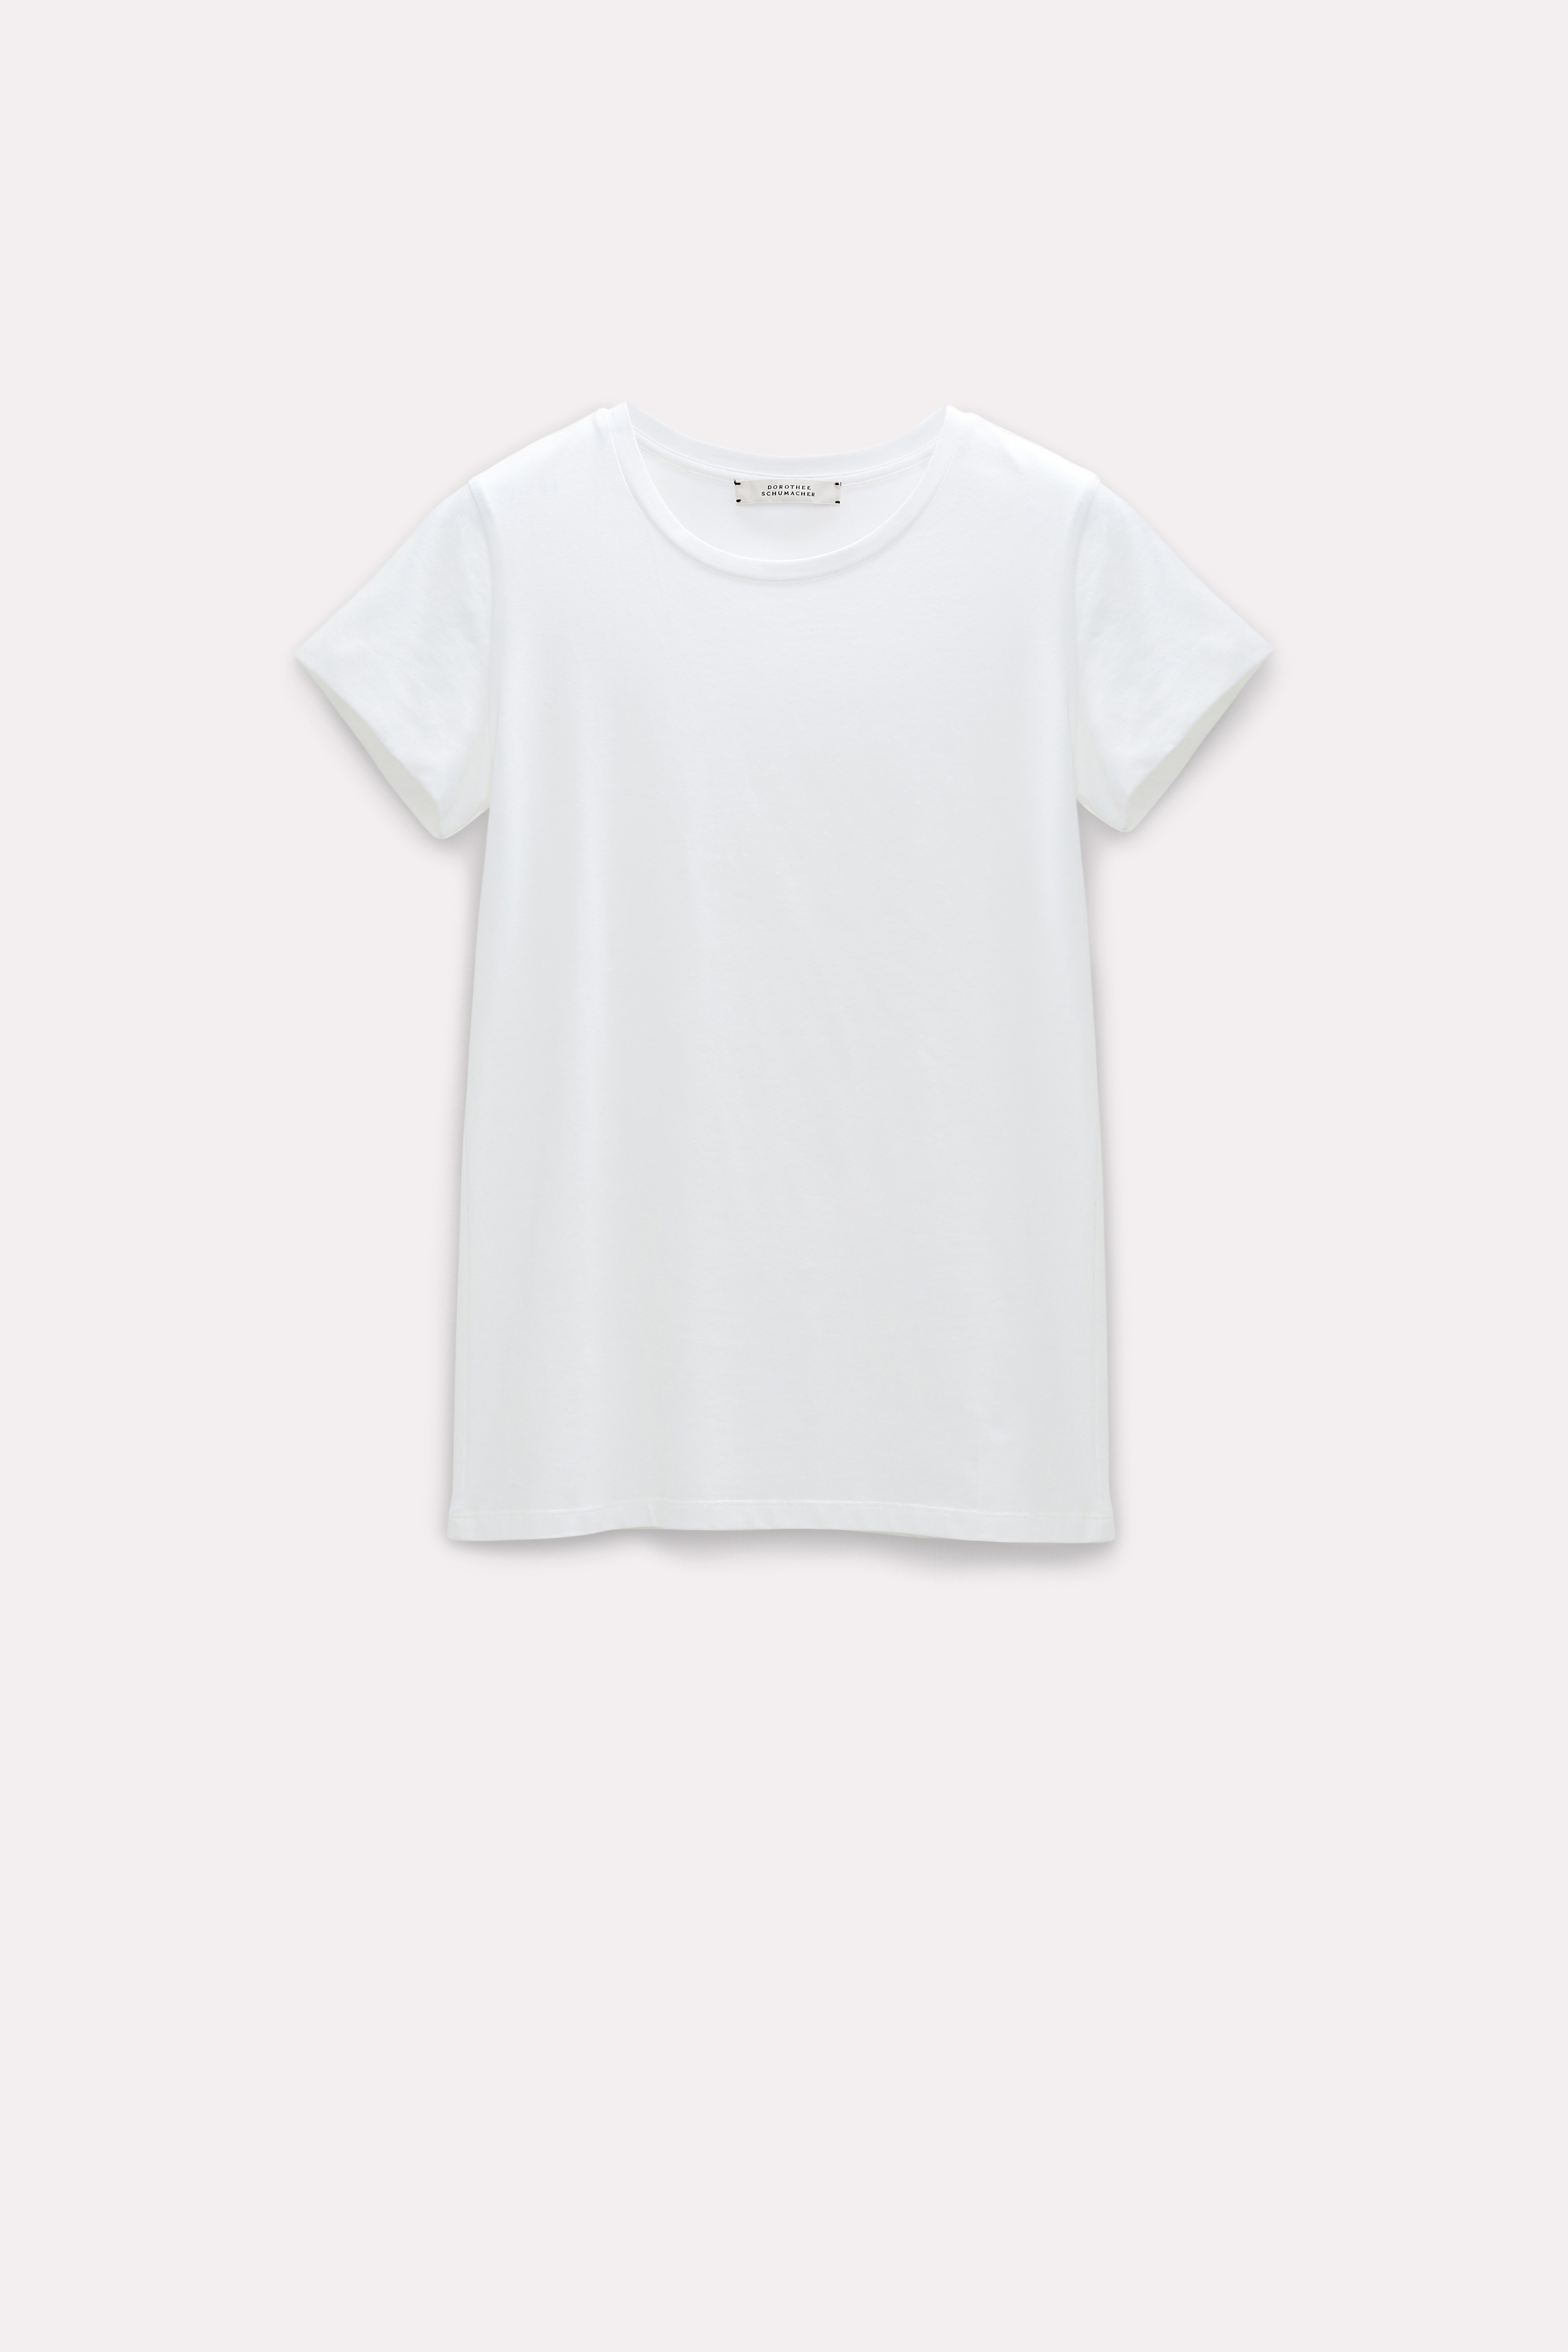 BASIC T-SHIRT IN COTTON JERSEY Basic on sale 2022 4